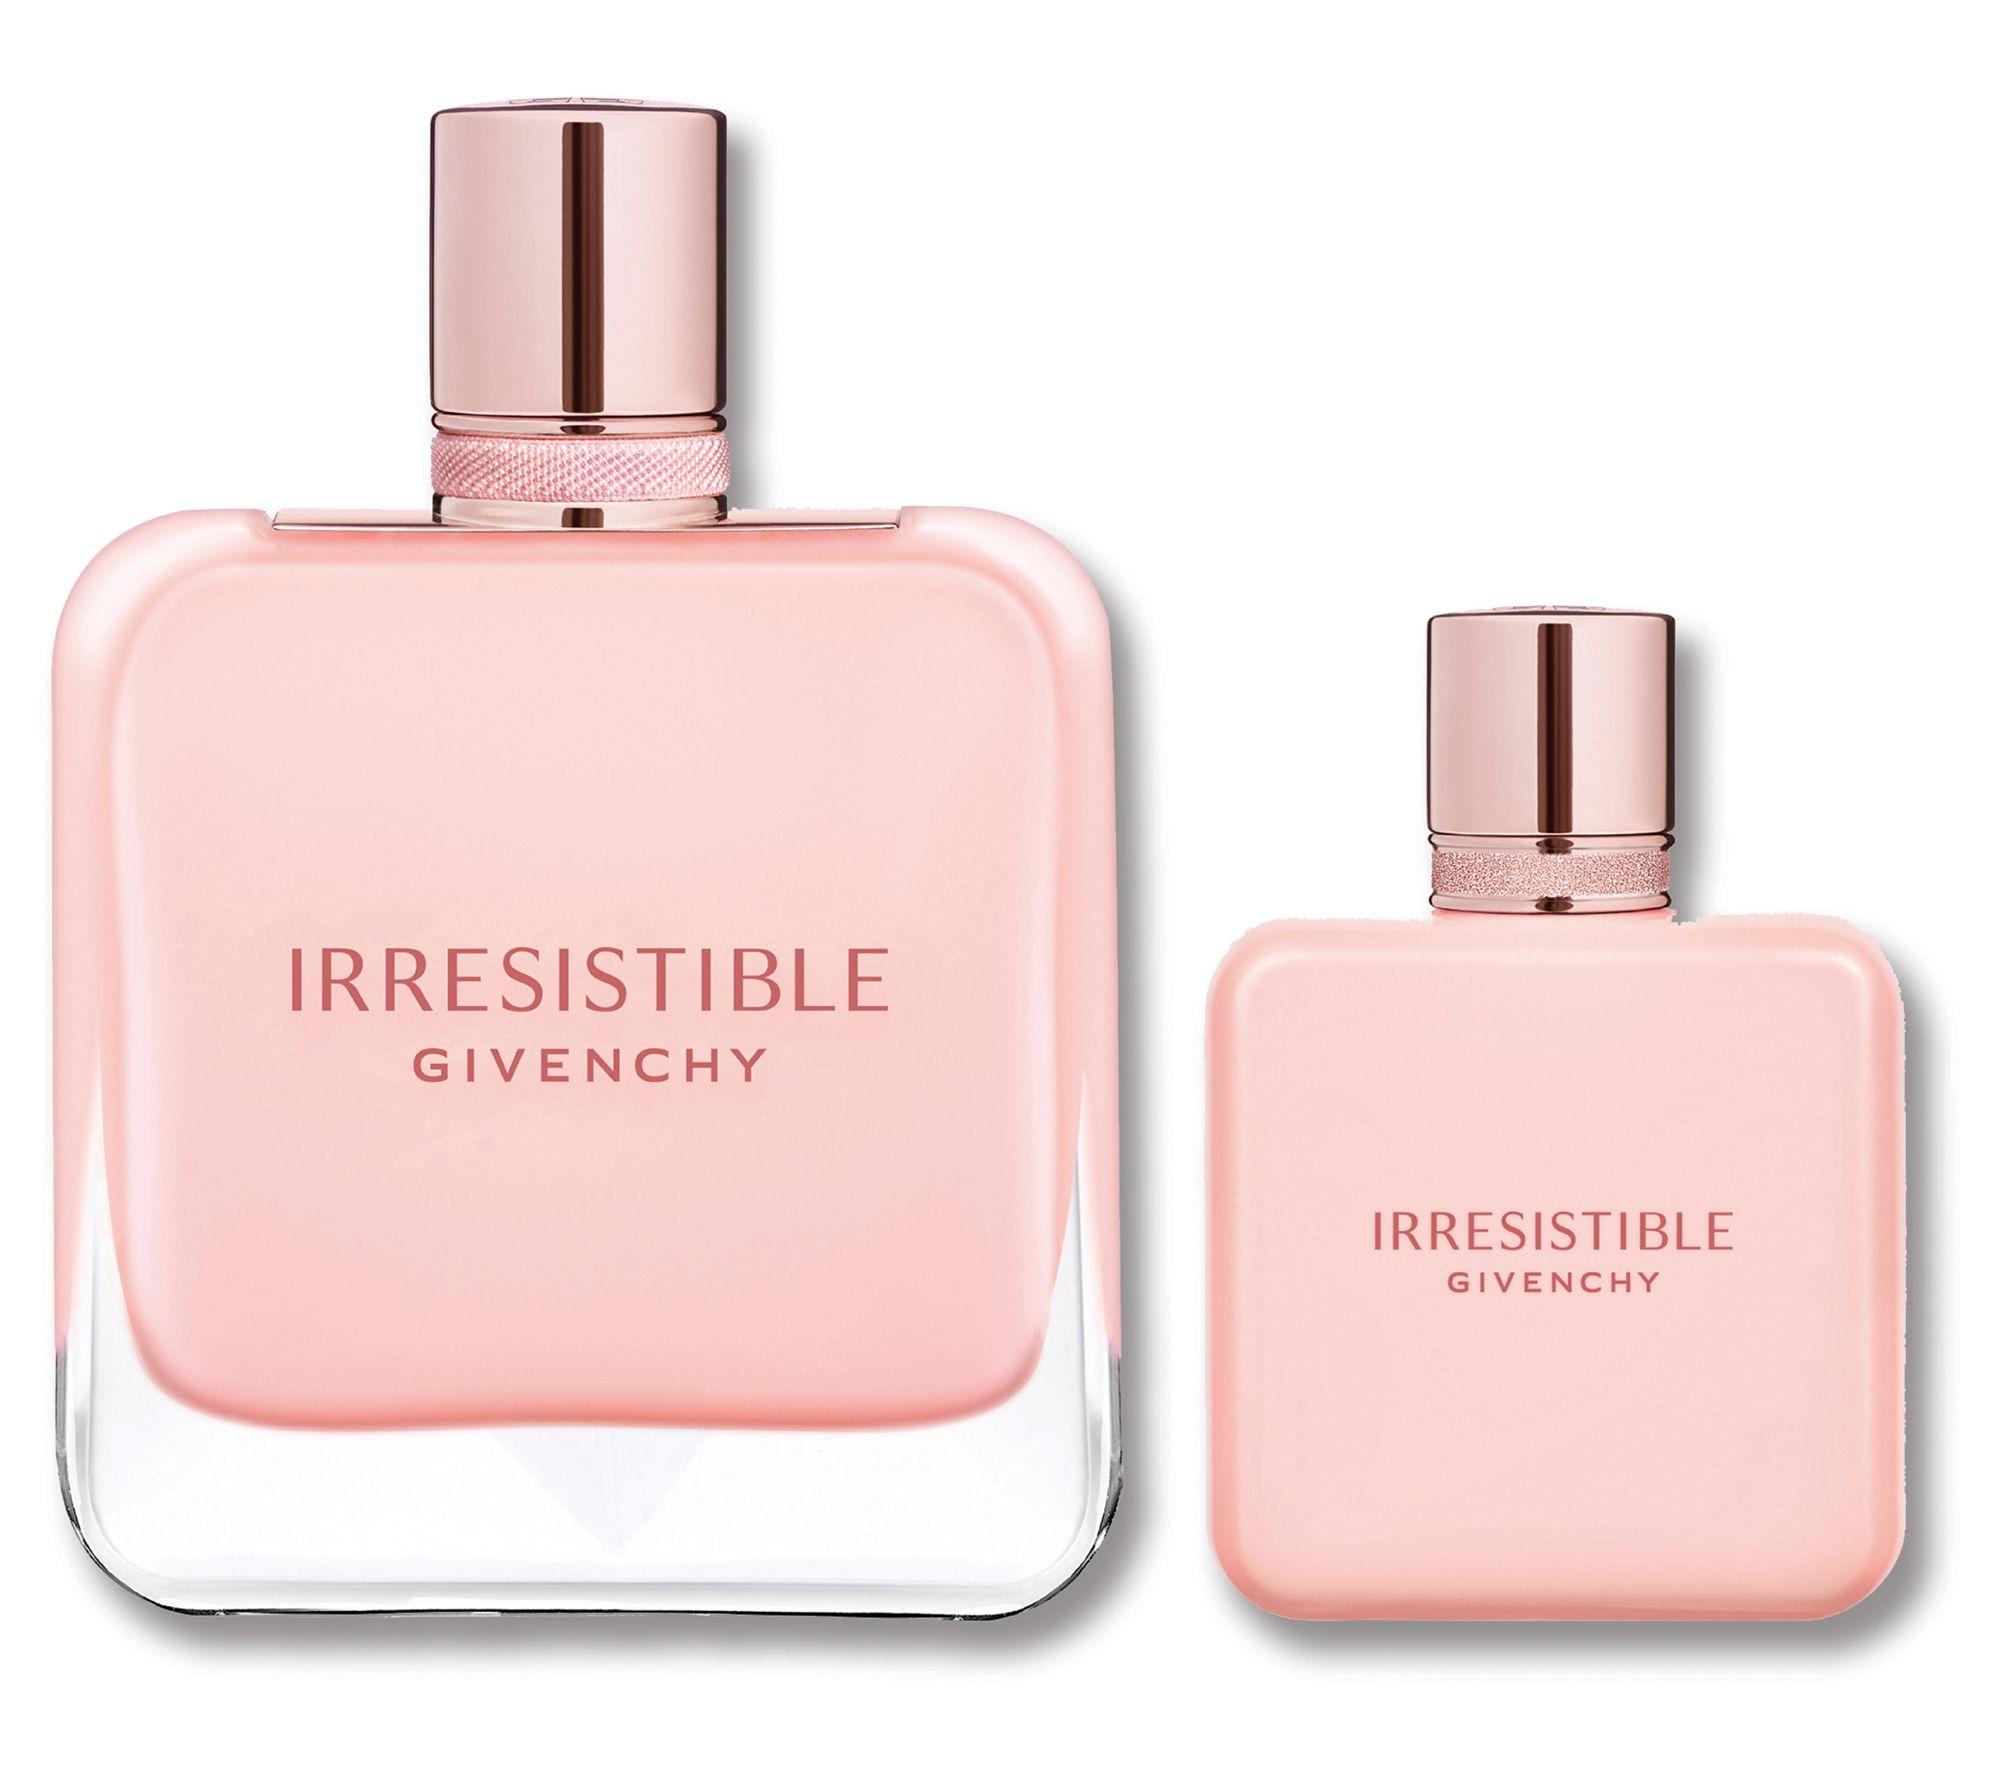 Gift Guide: Luxurious Fragrances for Men and Women - The Savvy Life